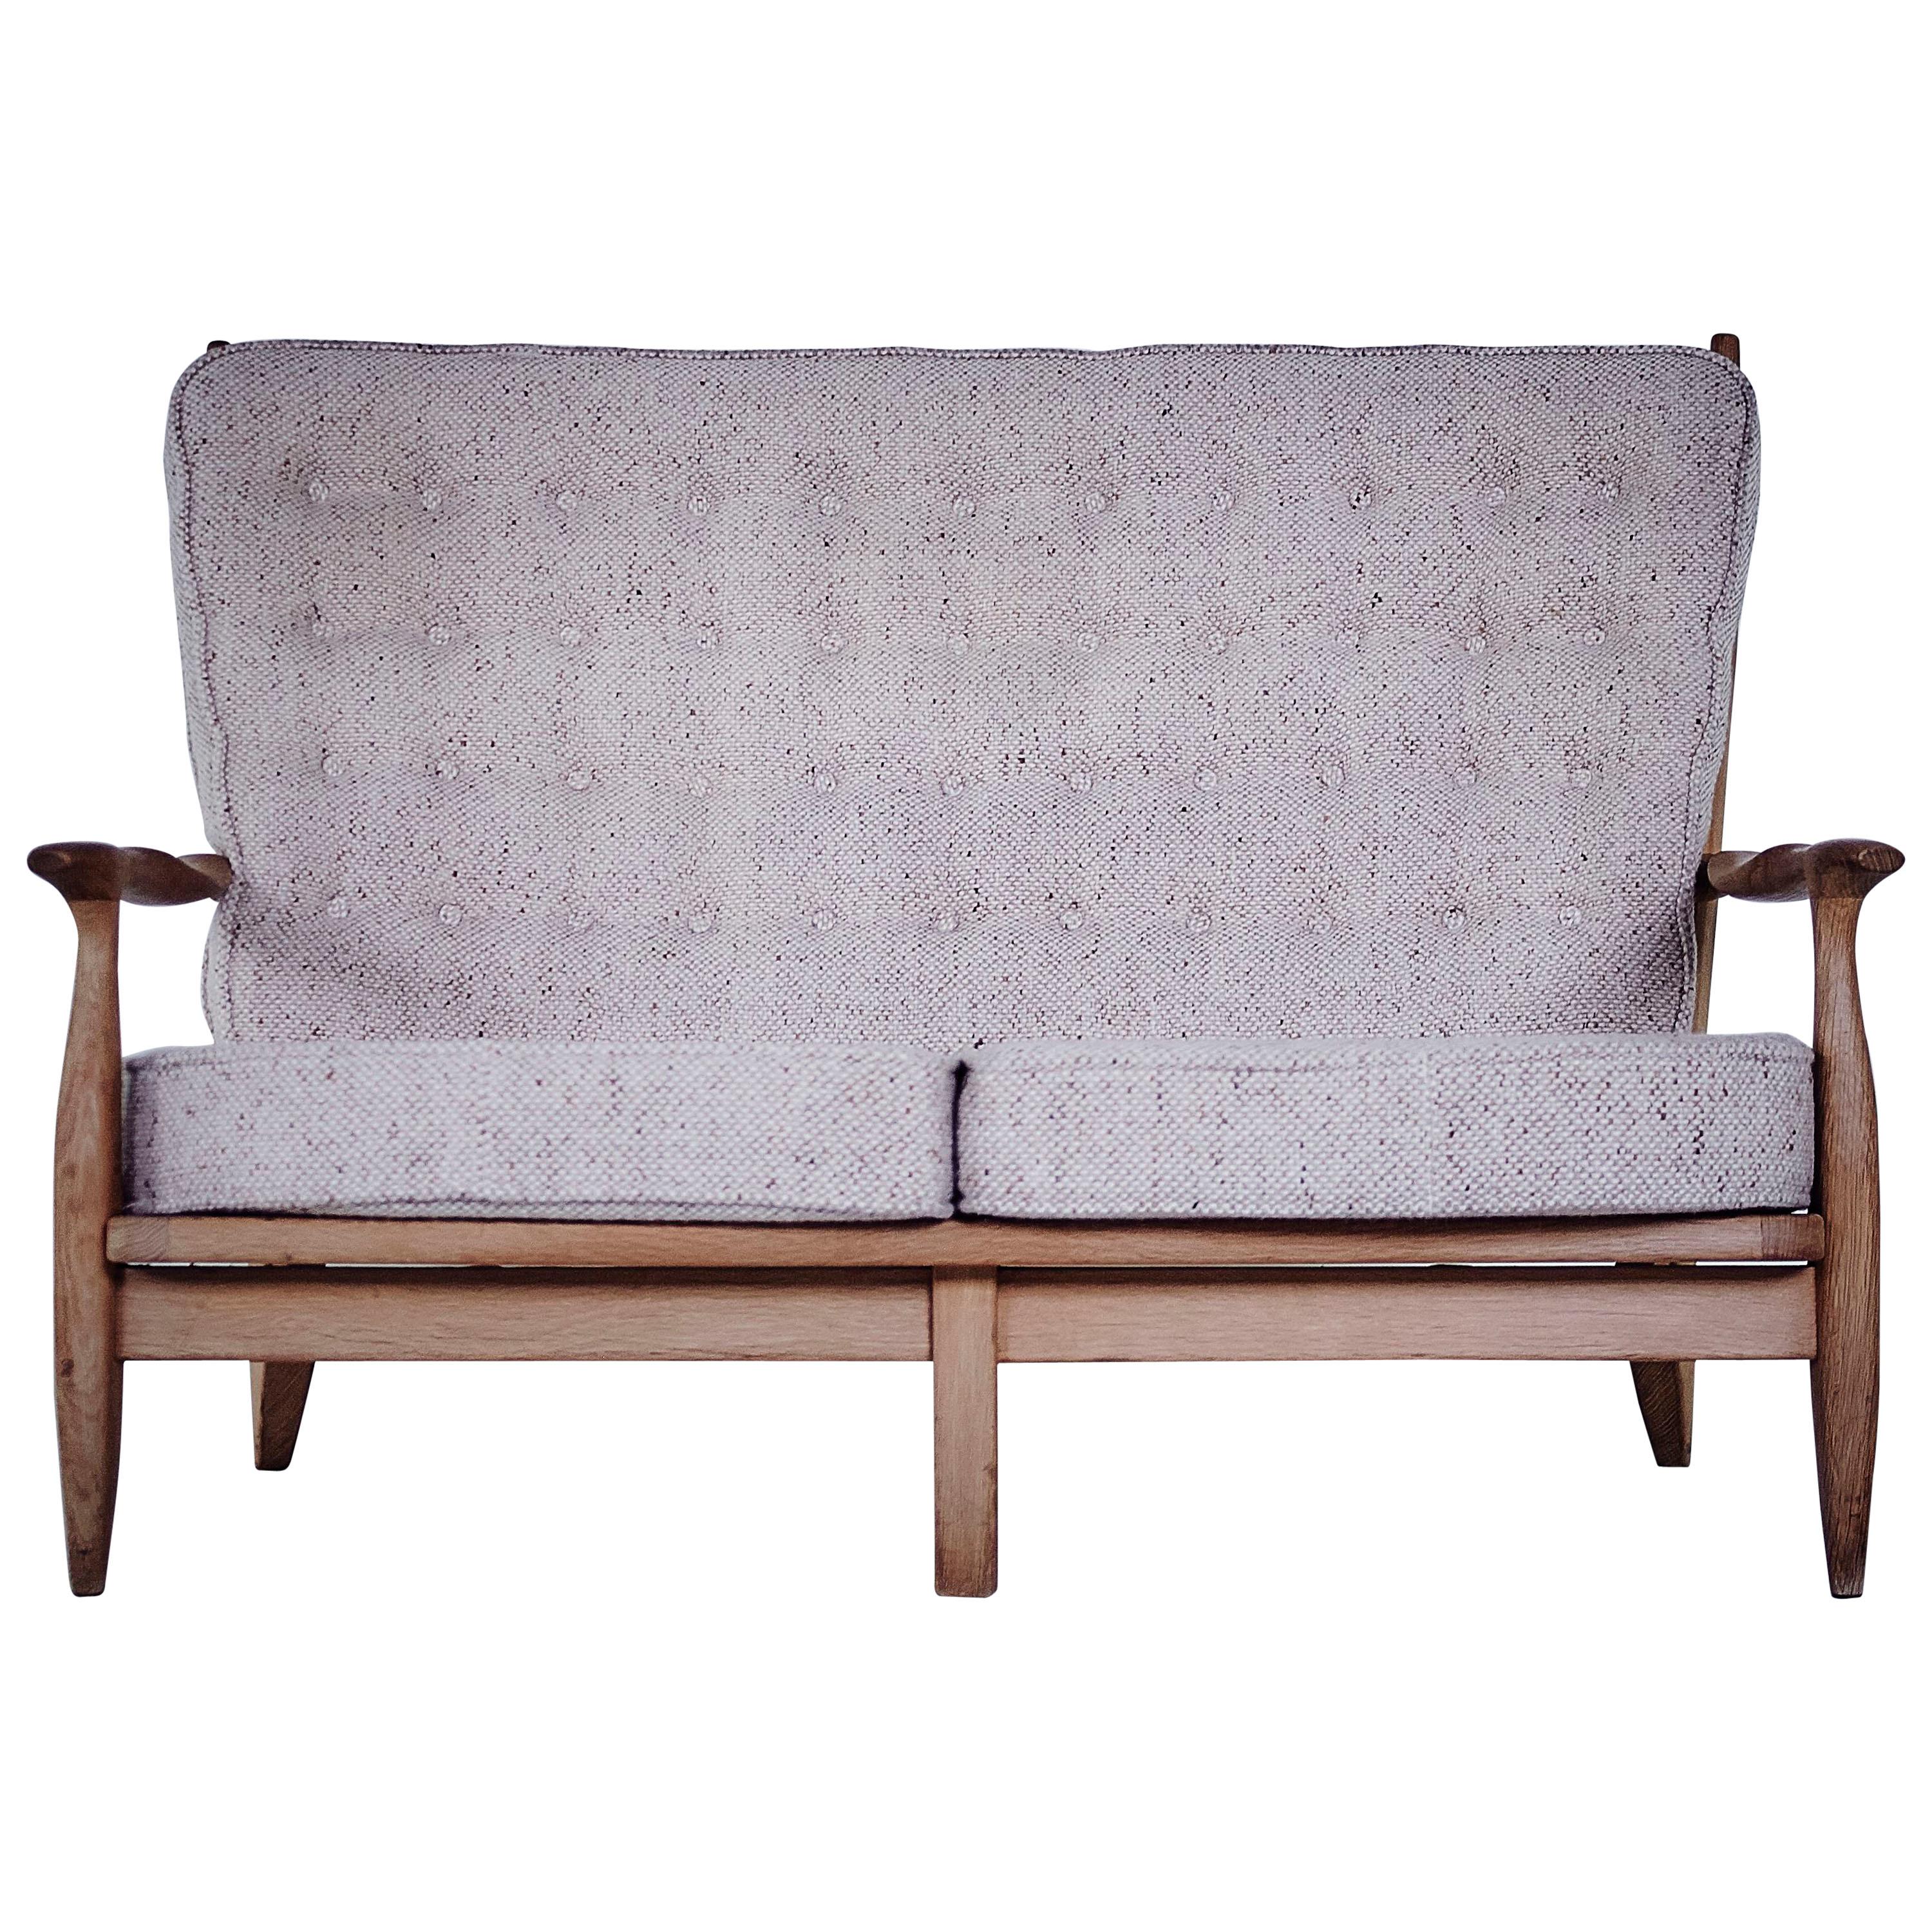 Guillerme and Chambron Midcentury Solid Oak Sofa for Votre Maison, 1975 For Sale